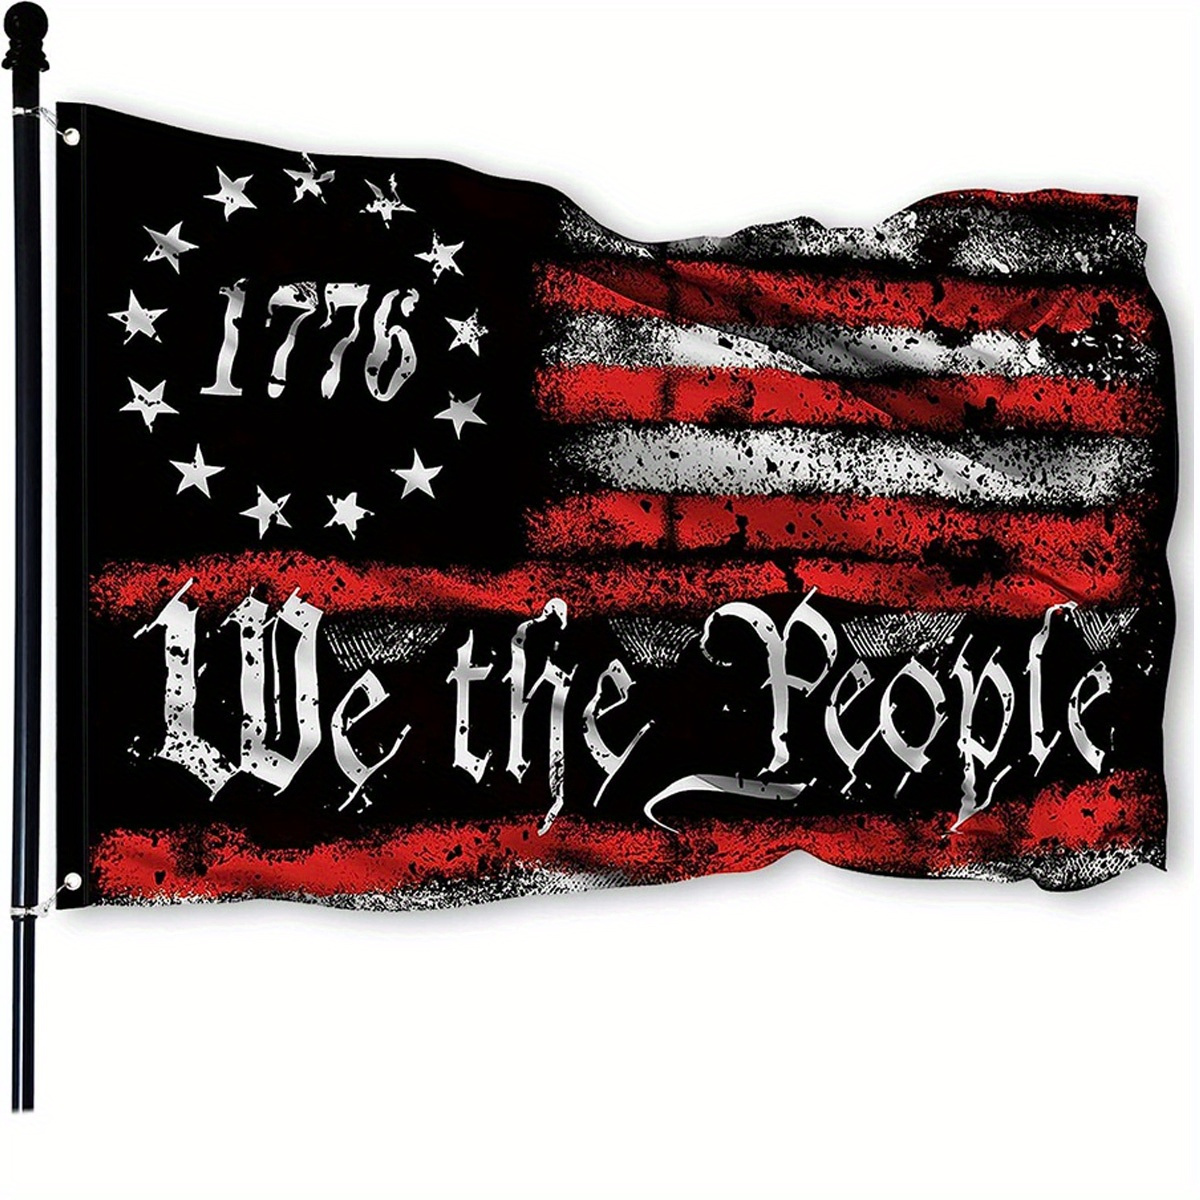 

We The People 1776 Flag 3x5 Feet 90x150cm Outdoor Betsy Ross 13 Star American Constitution Flags Indoor Garden Decoration With 2 Grommets